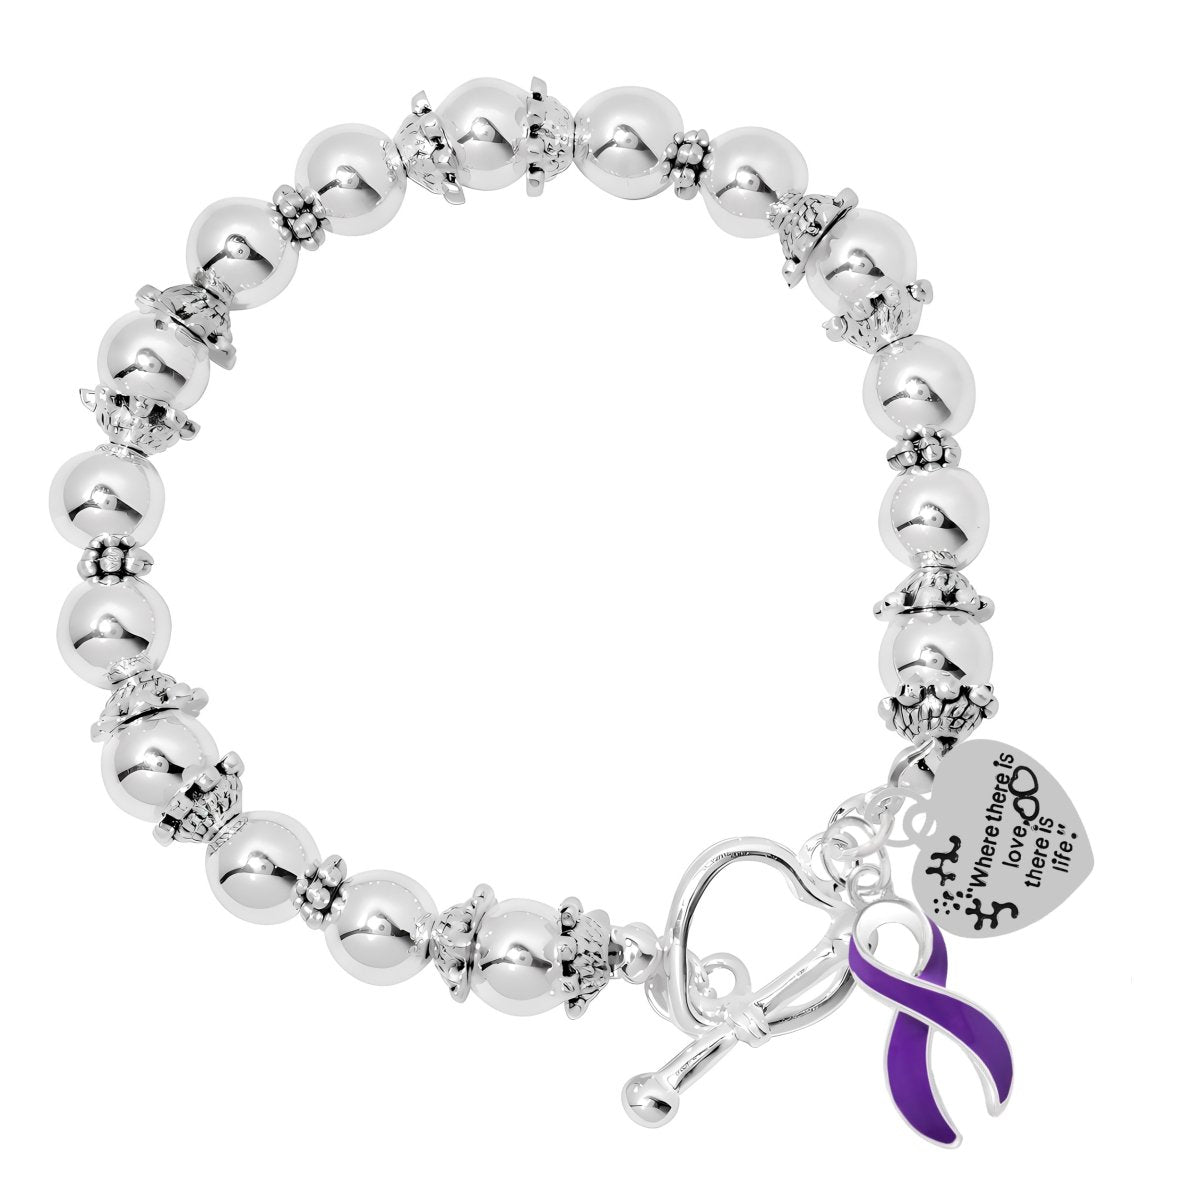 Pancreatic Cancer Awareness Charm Bracelets - Fundraising For A Cause